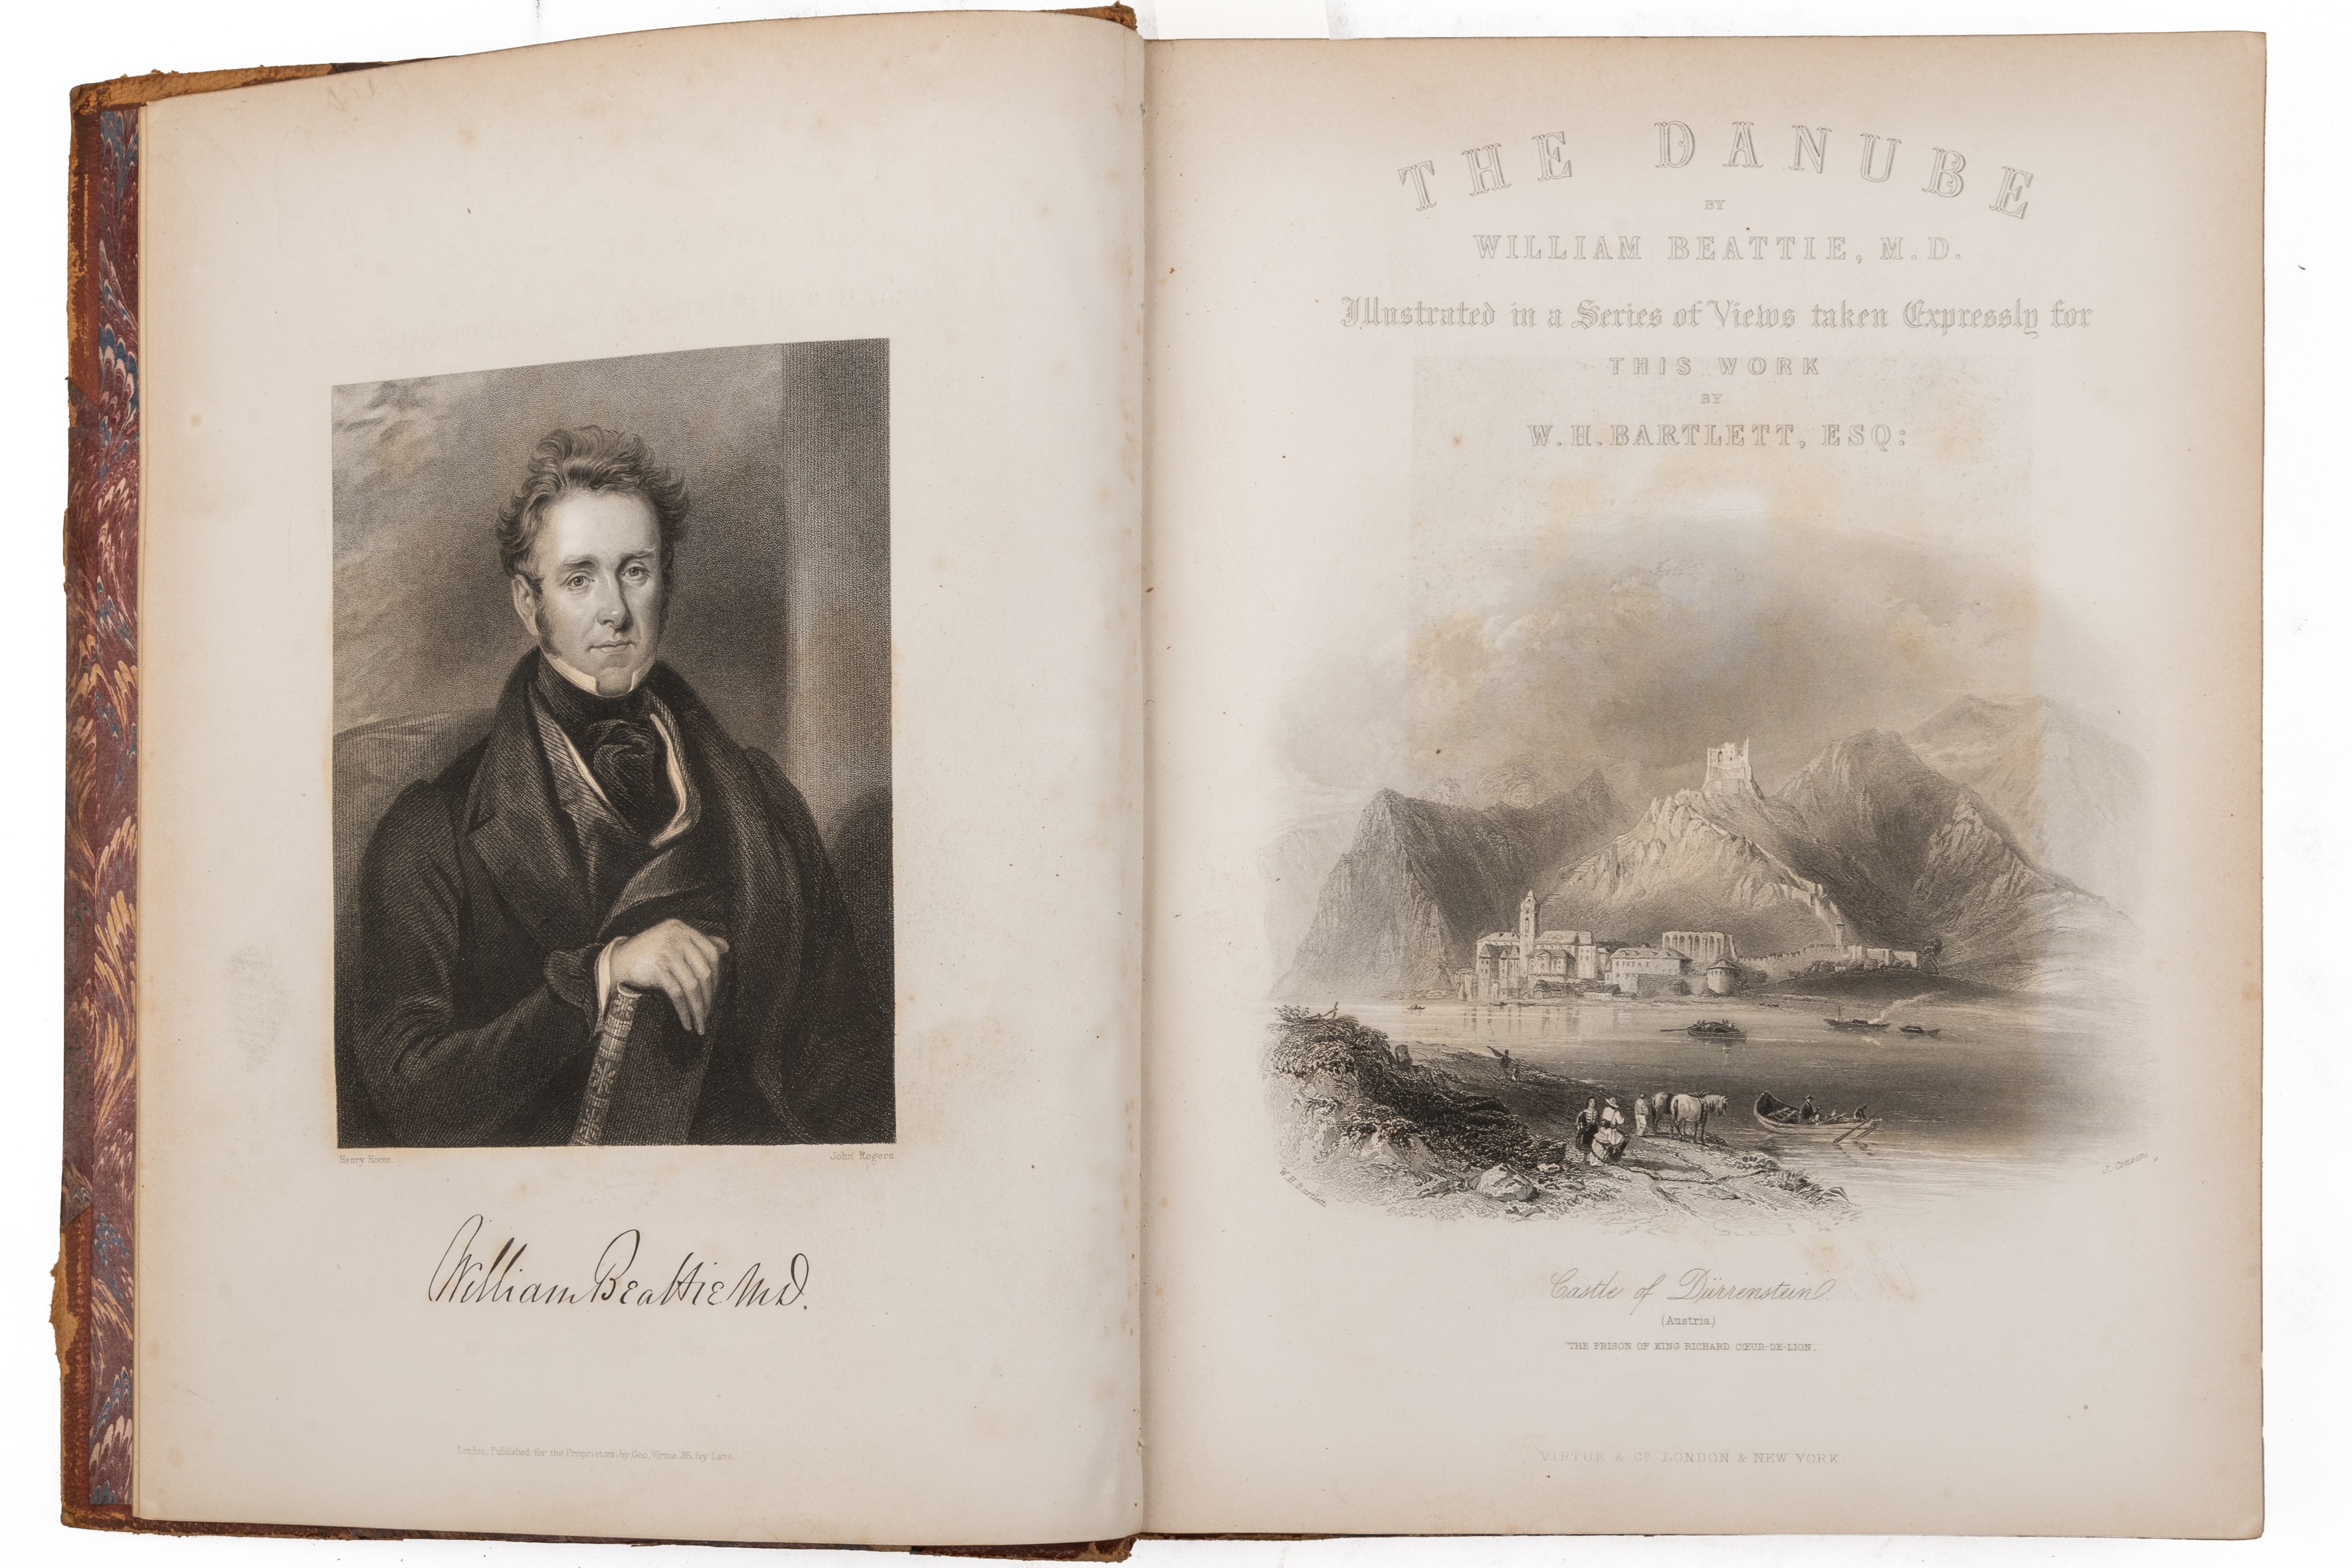 Beattie (William) 'The Danube, Illustrated in a Series of Views...' Virtue, London n/d 1840? with